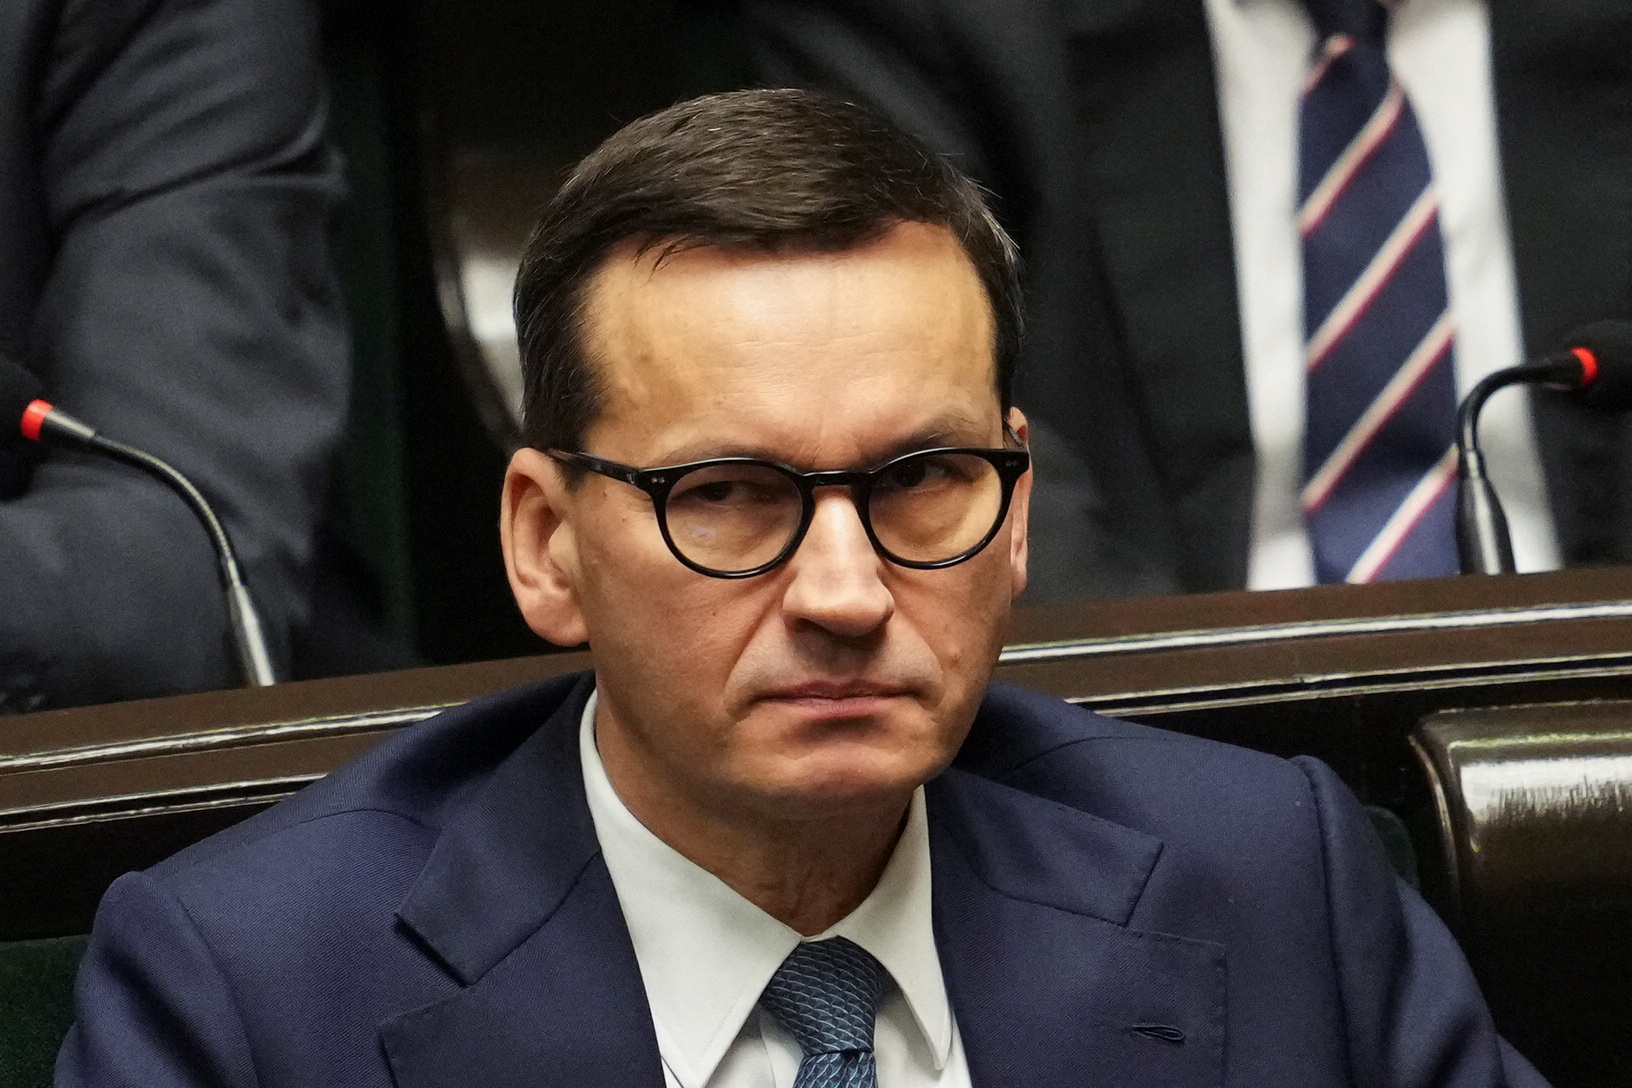 Former Polish PM Morawiecki attends new government's programme presentation in Warsaw